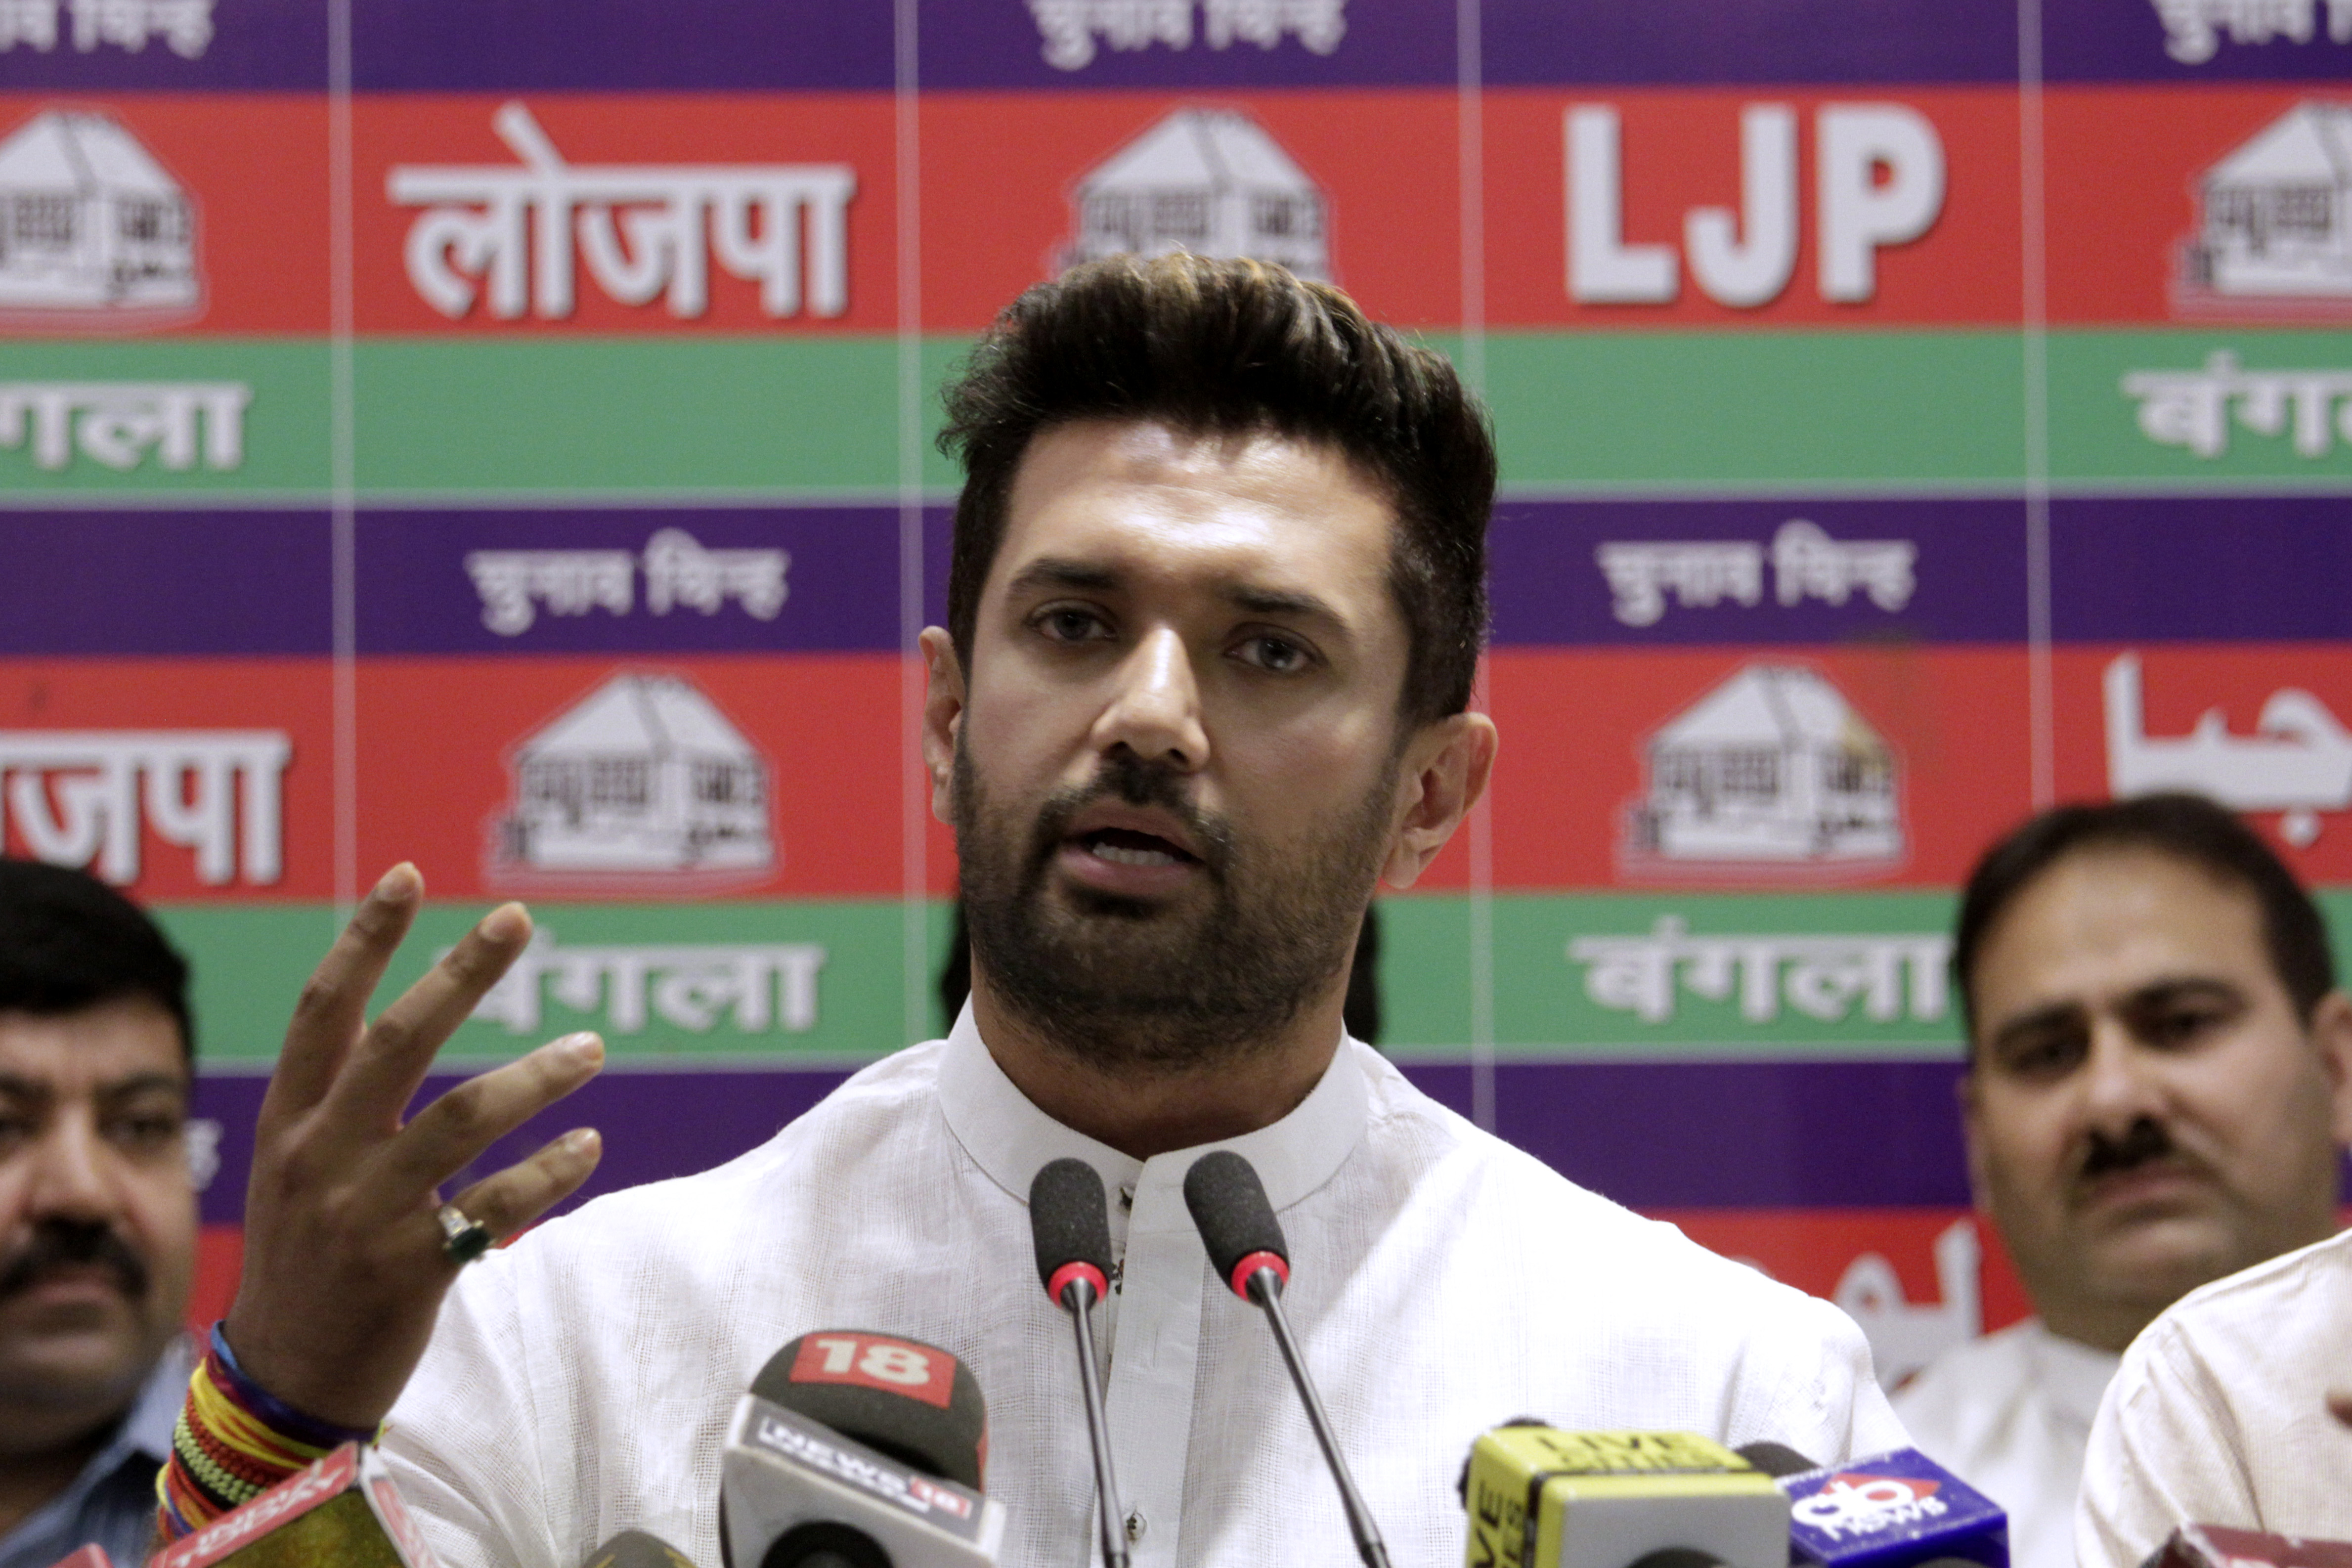 Chirag Paswan removed as LJP chief, Pashupati Kumar likely to be elected new chief soon